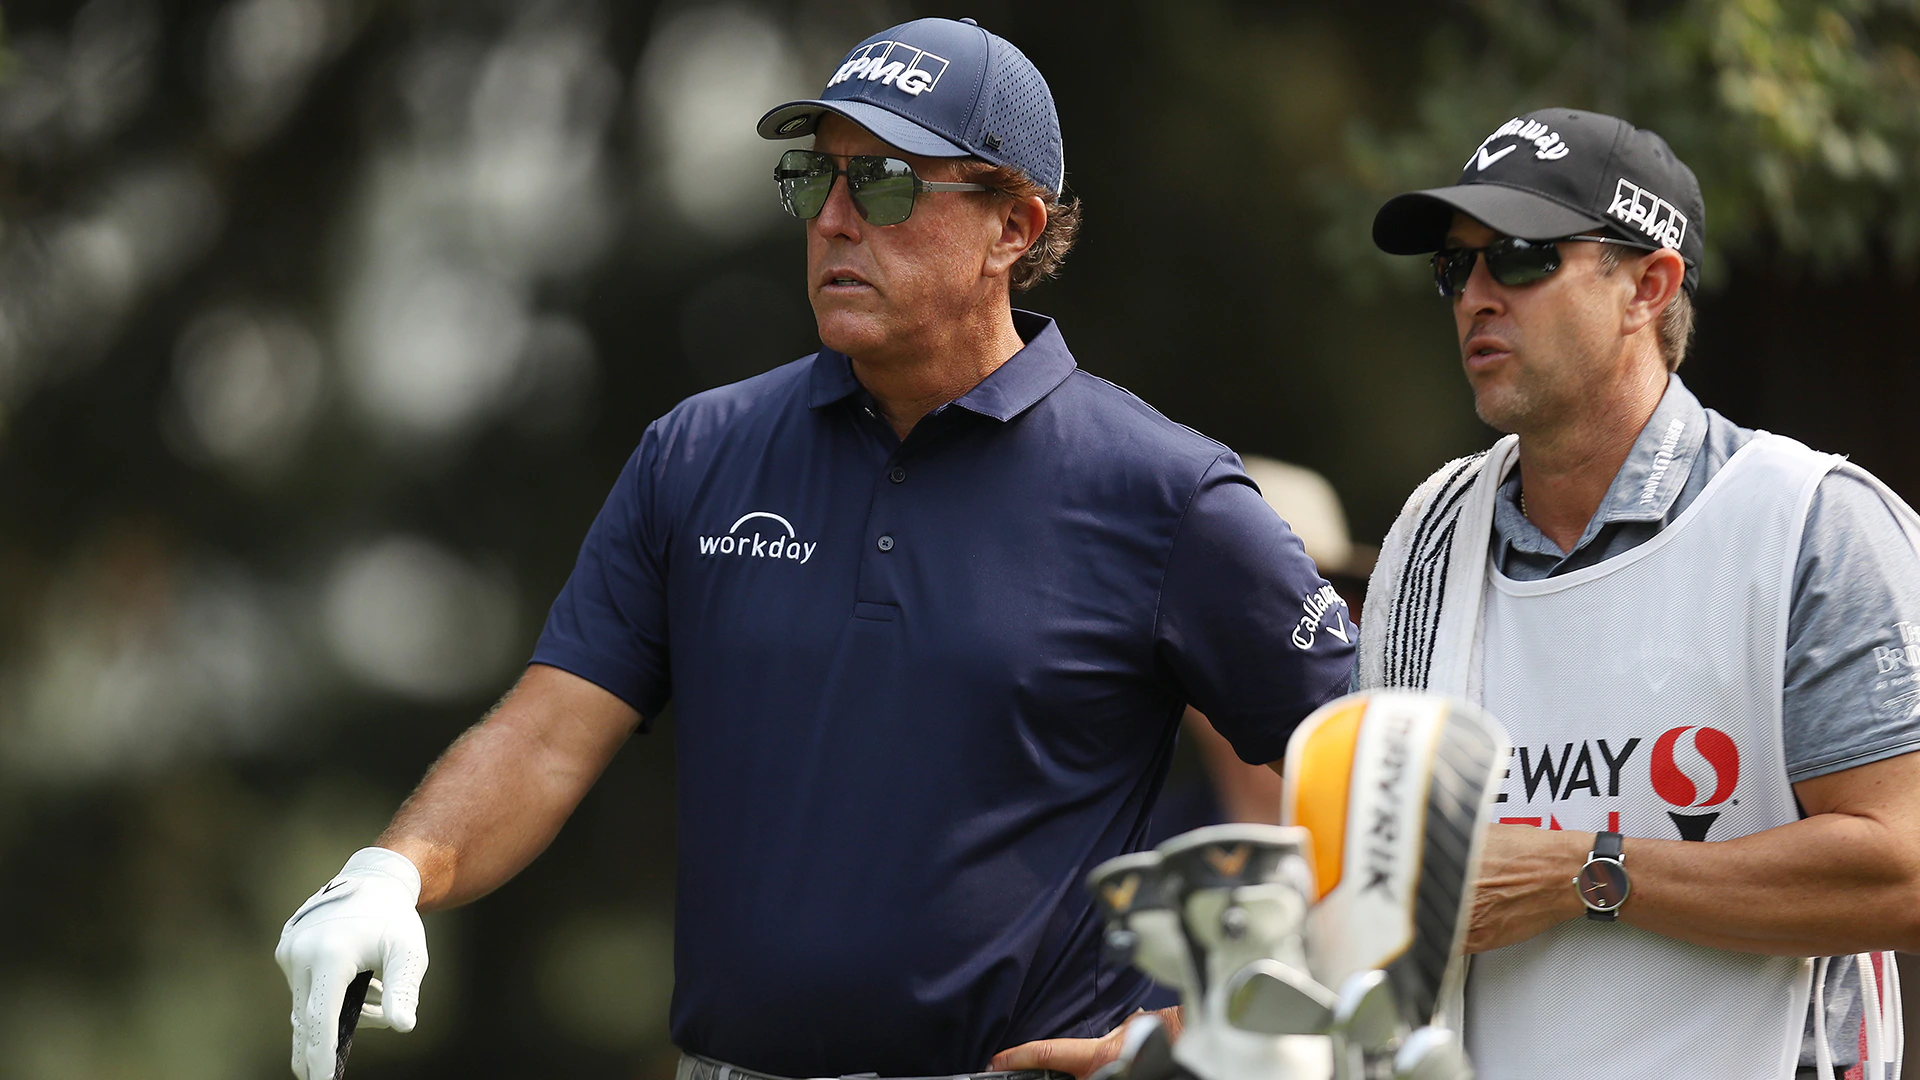 U.S. Open: Phil Mickelson seeks better accuracy, not redemption at Winged Foot